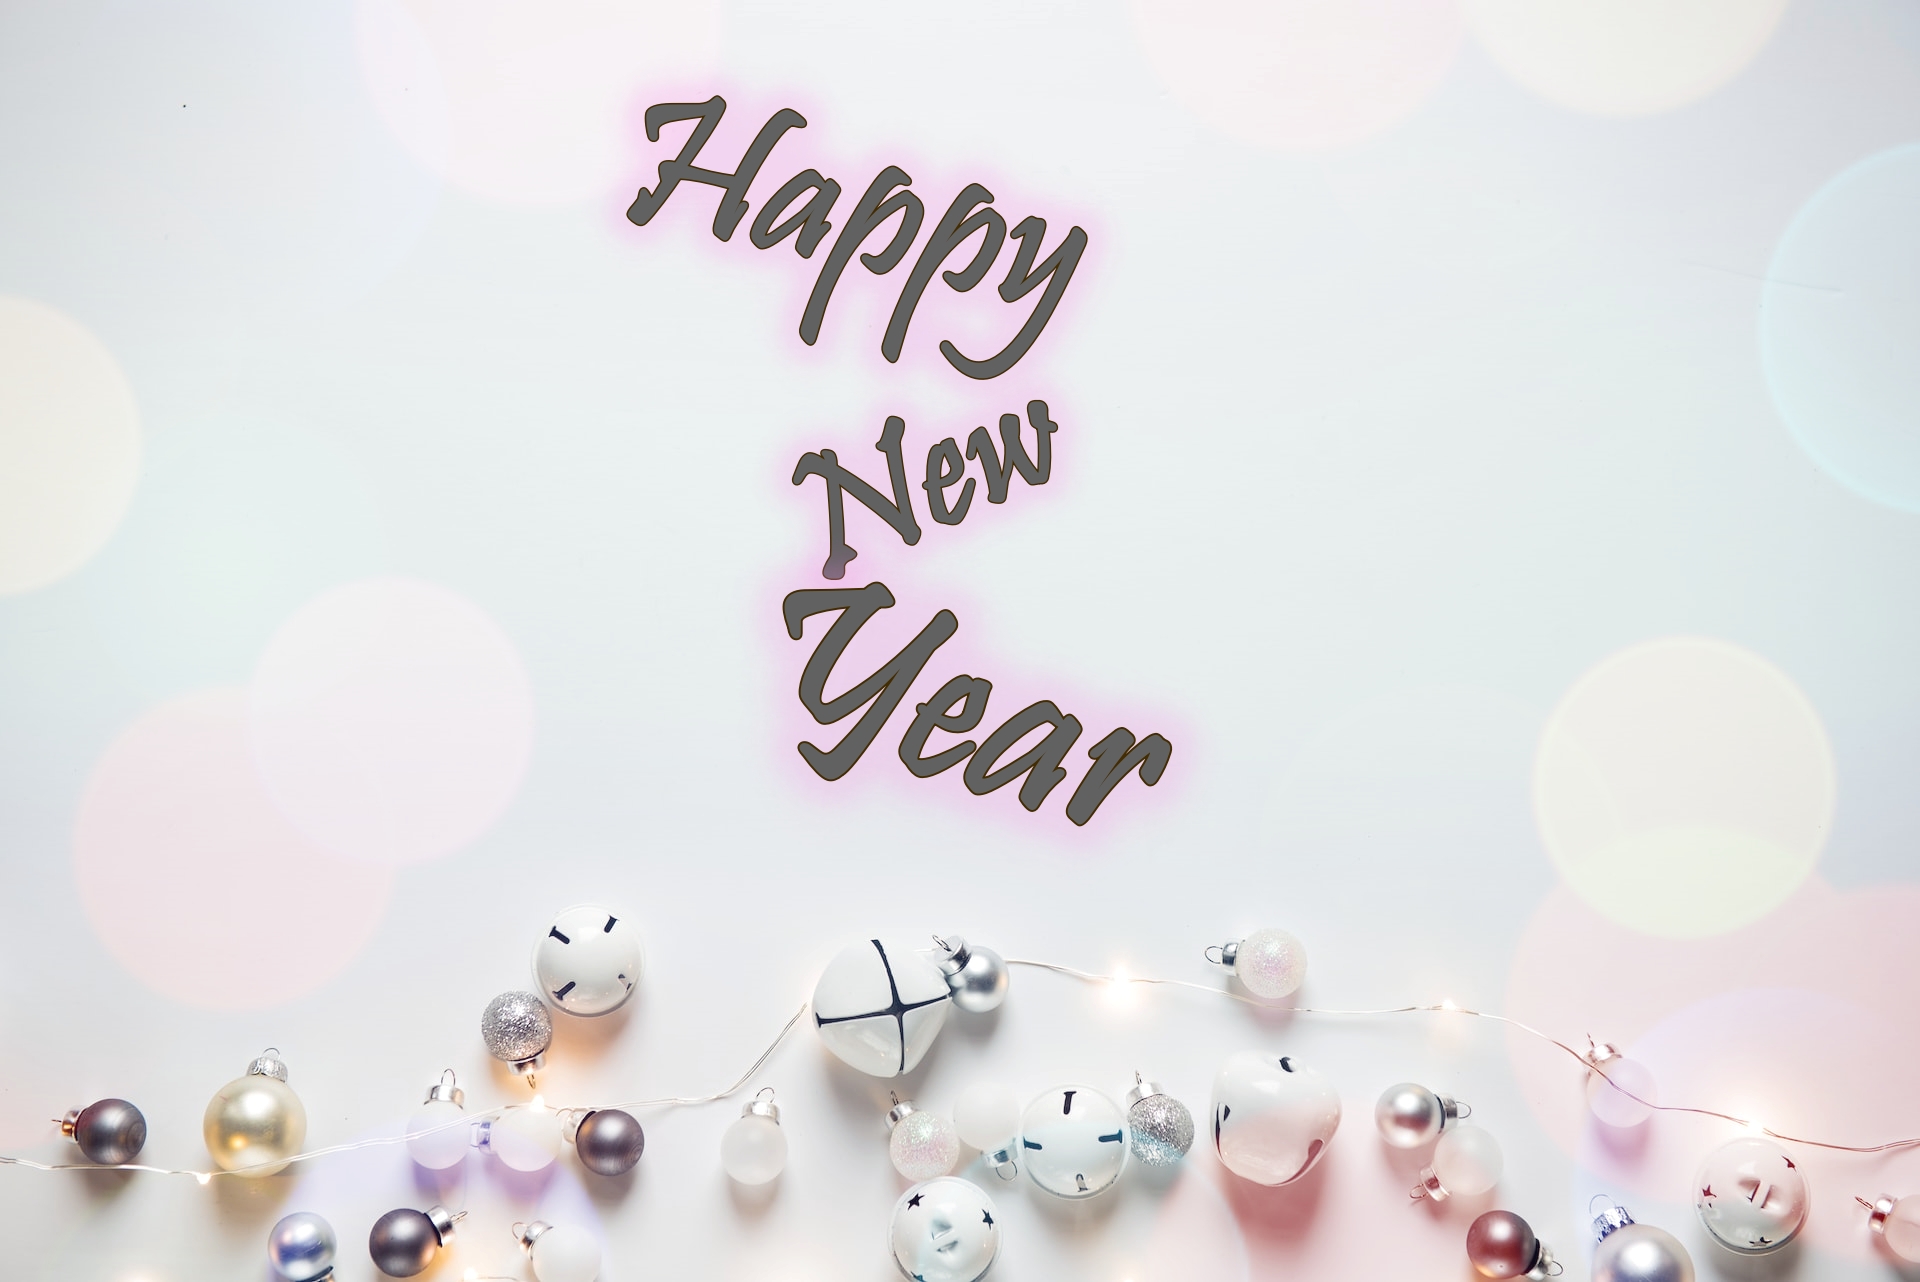 New Year 2023 Background Image HD, Wallpaper